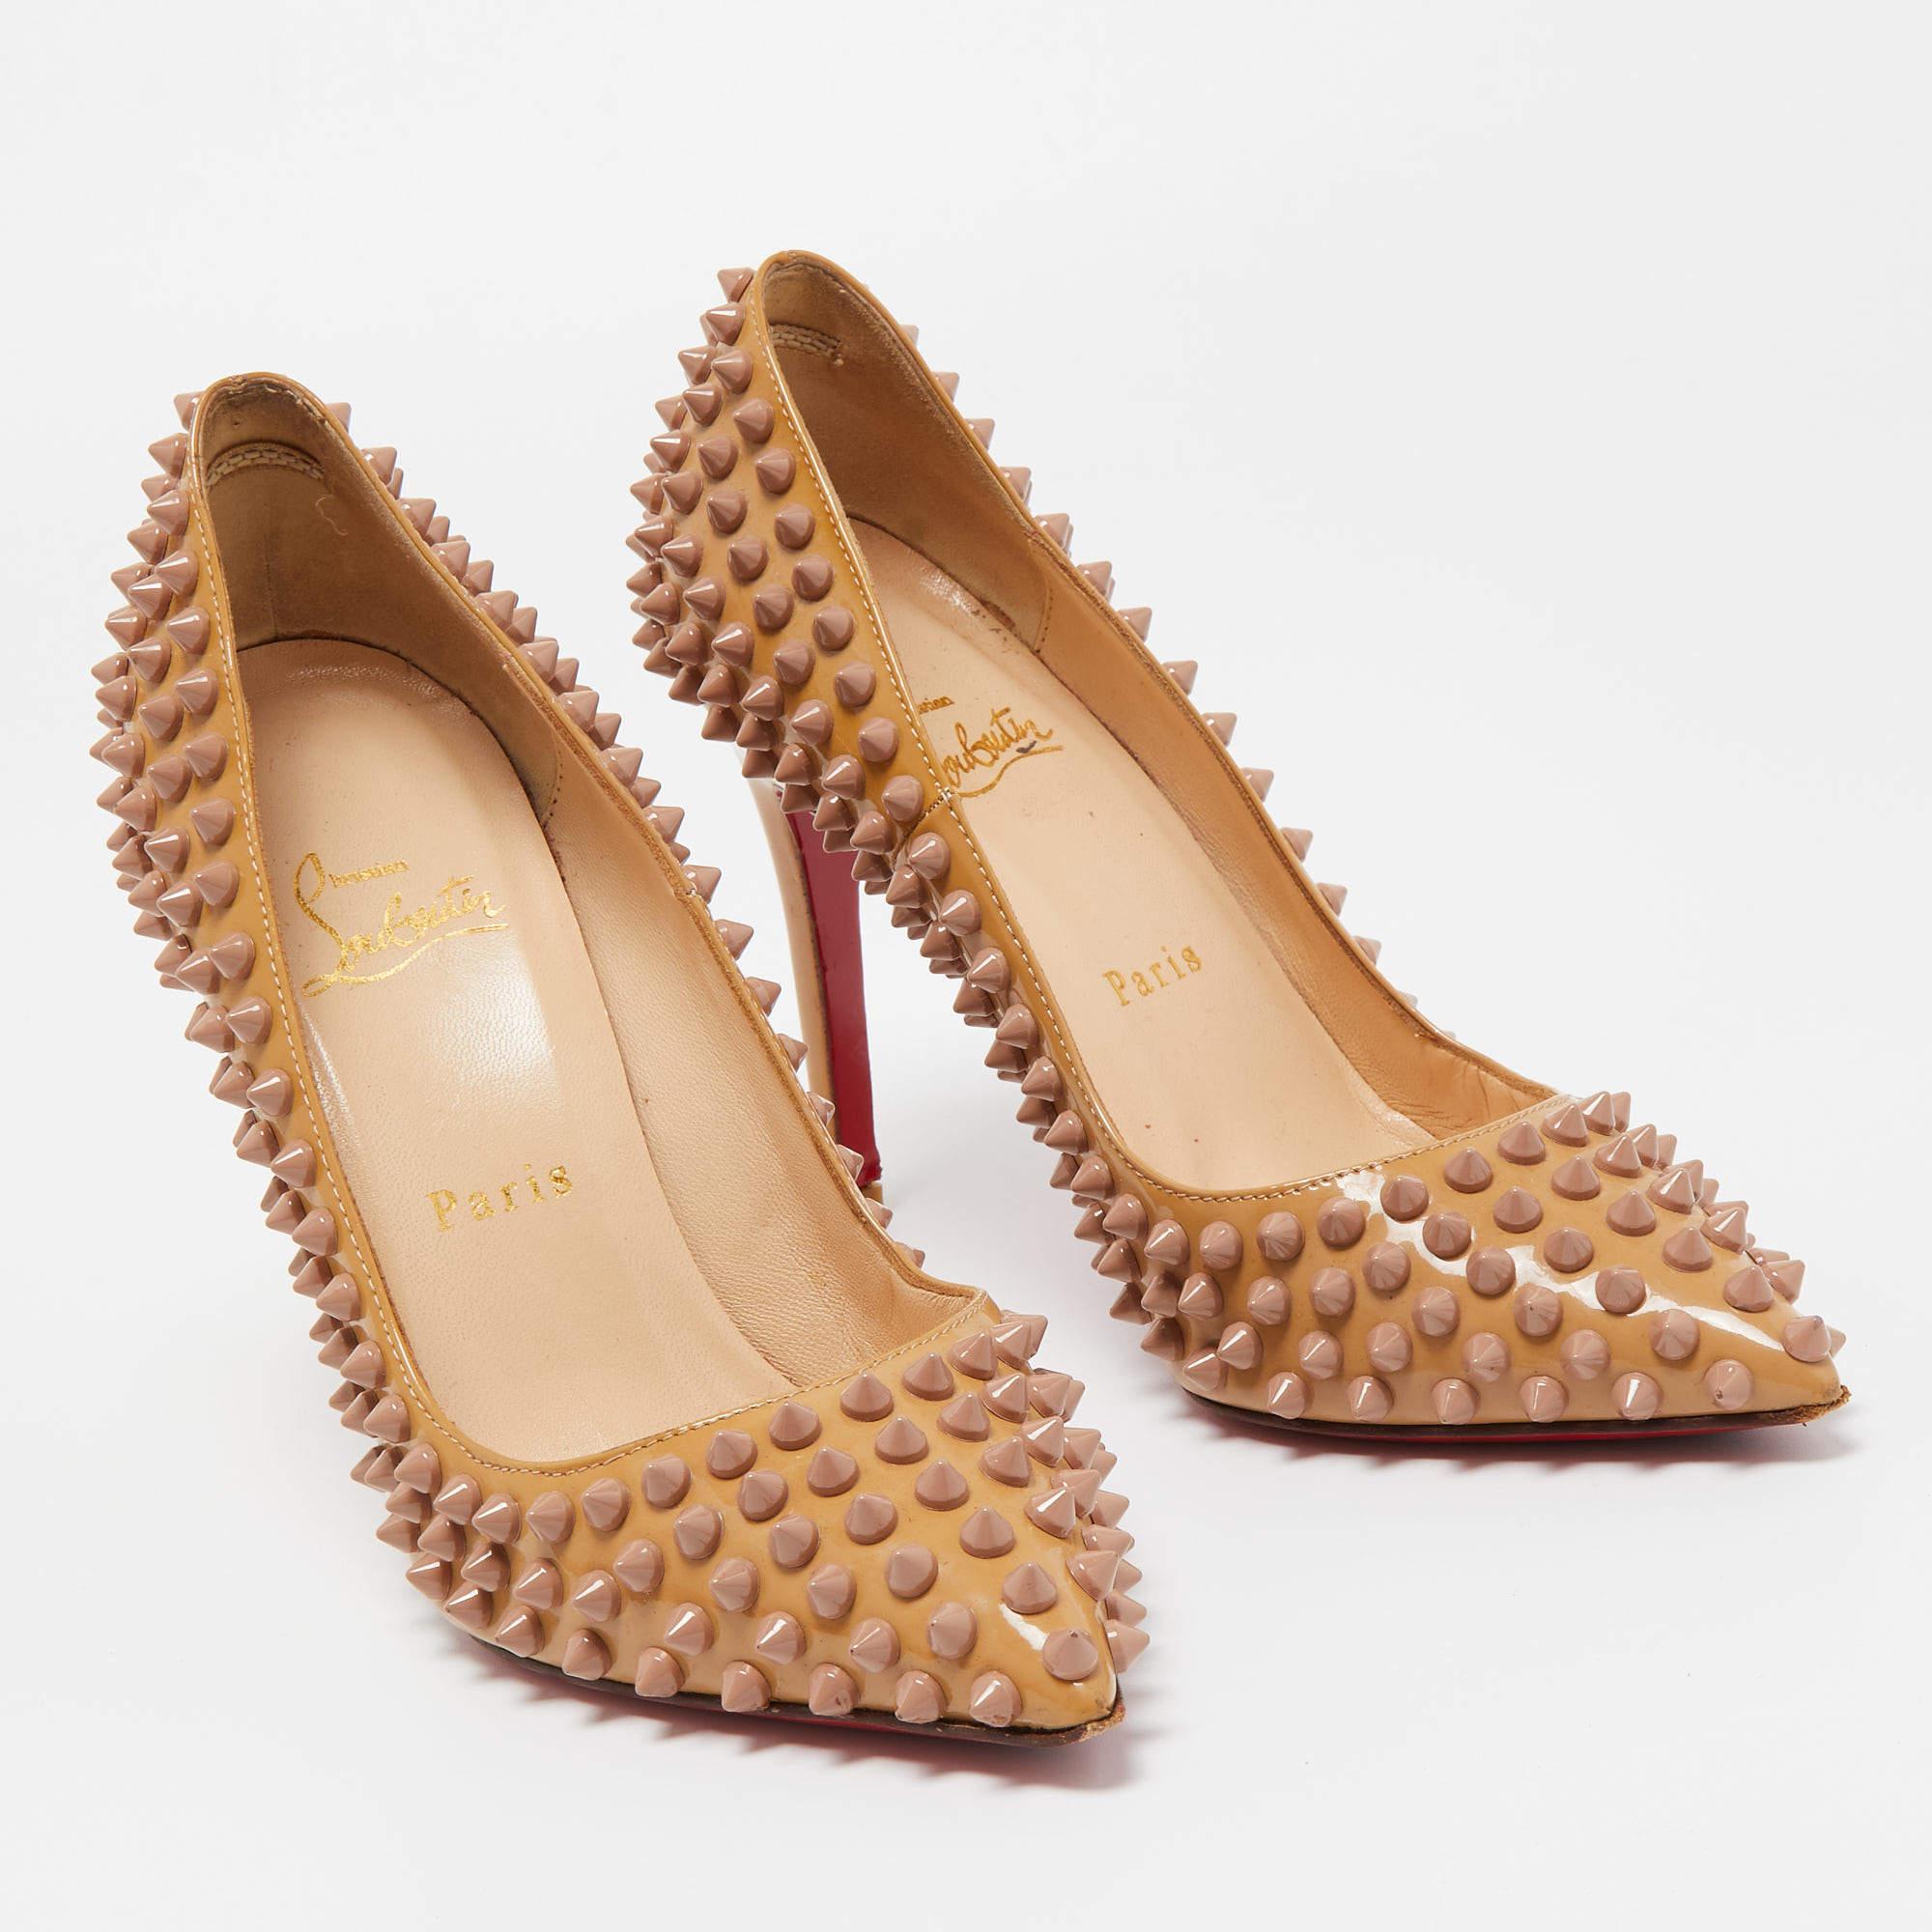 Christian Louboutin Beige Patent Leather Pigalle Spikes Pumps Size 37 In Good Condition For Sale In Dubai, Al Qouz 2